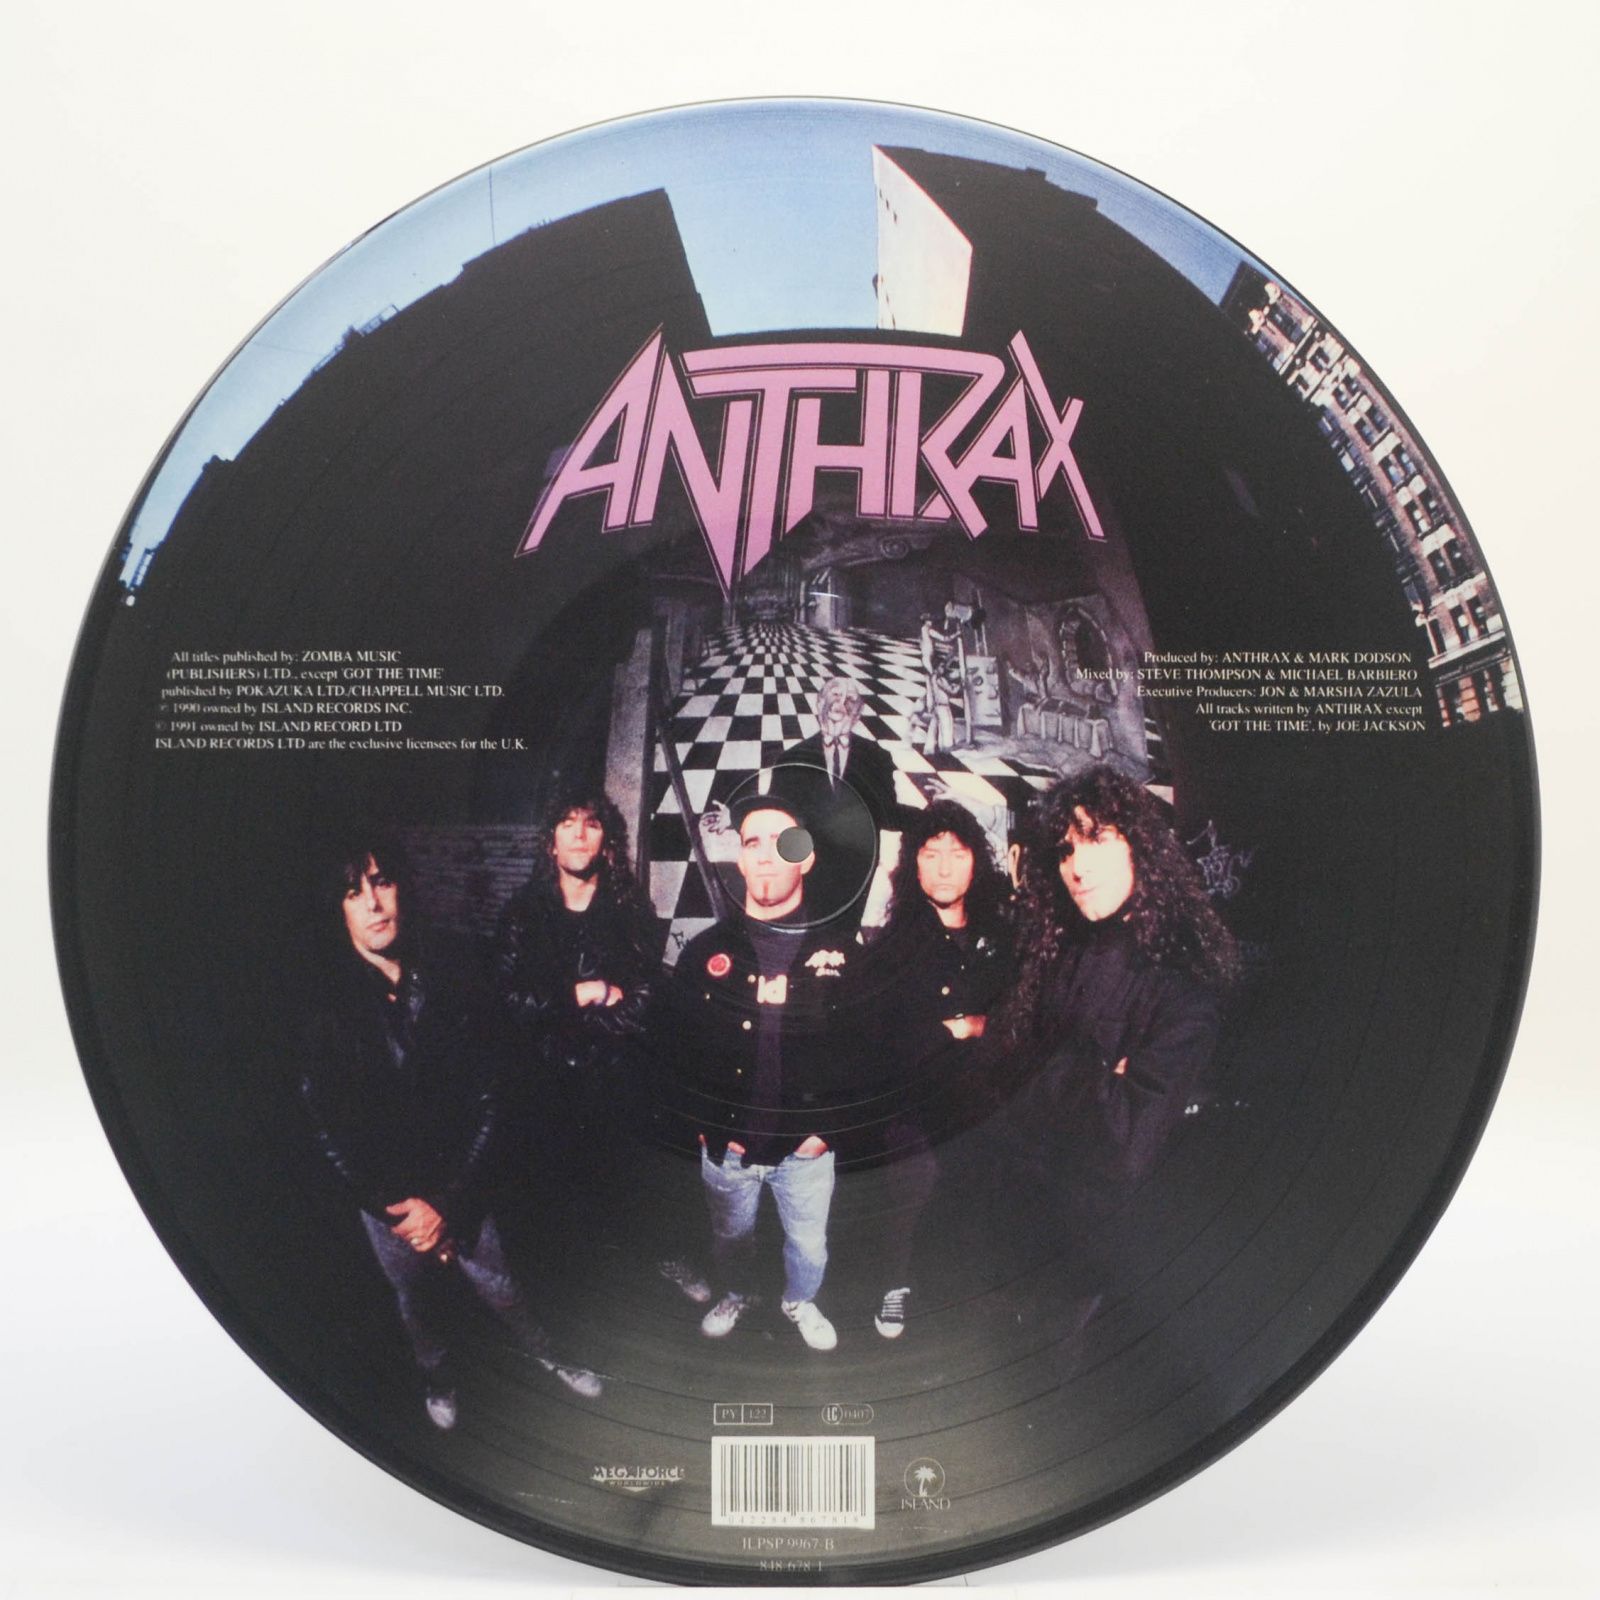 Anthrax — Persistence Of Time, 1990